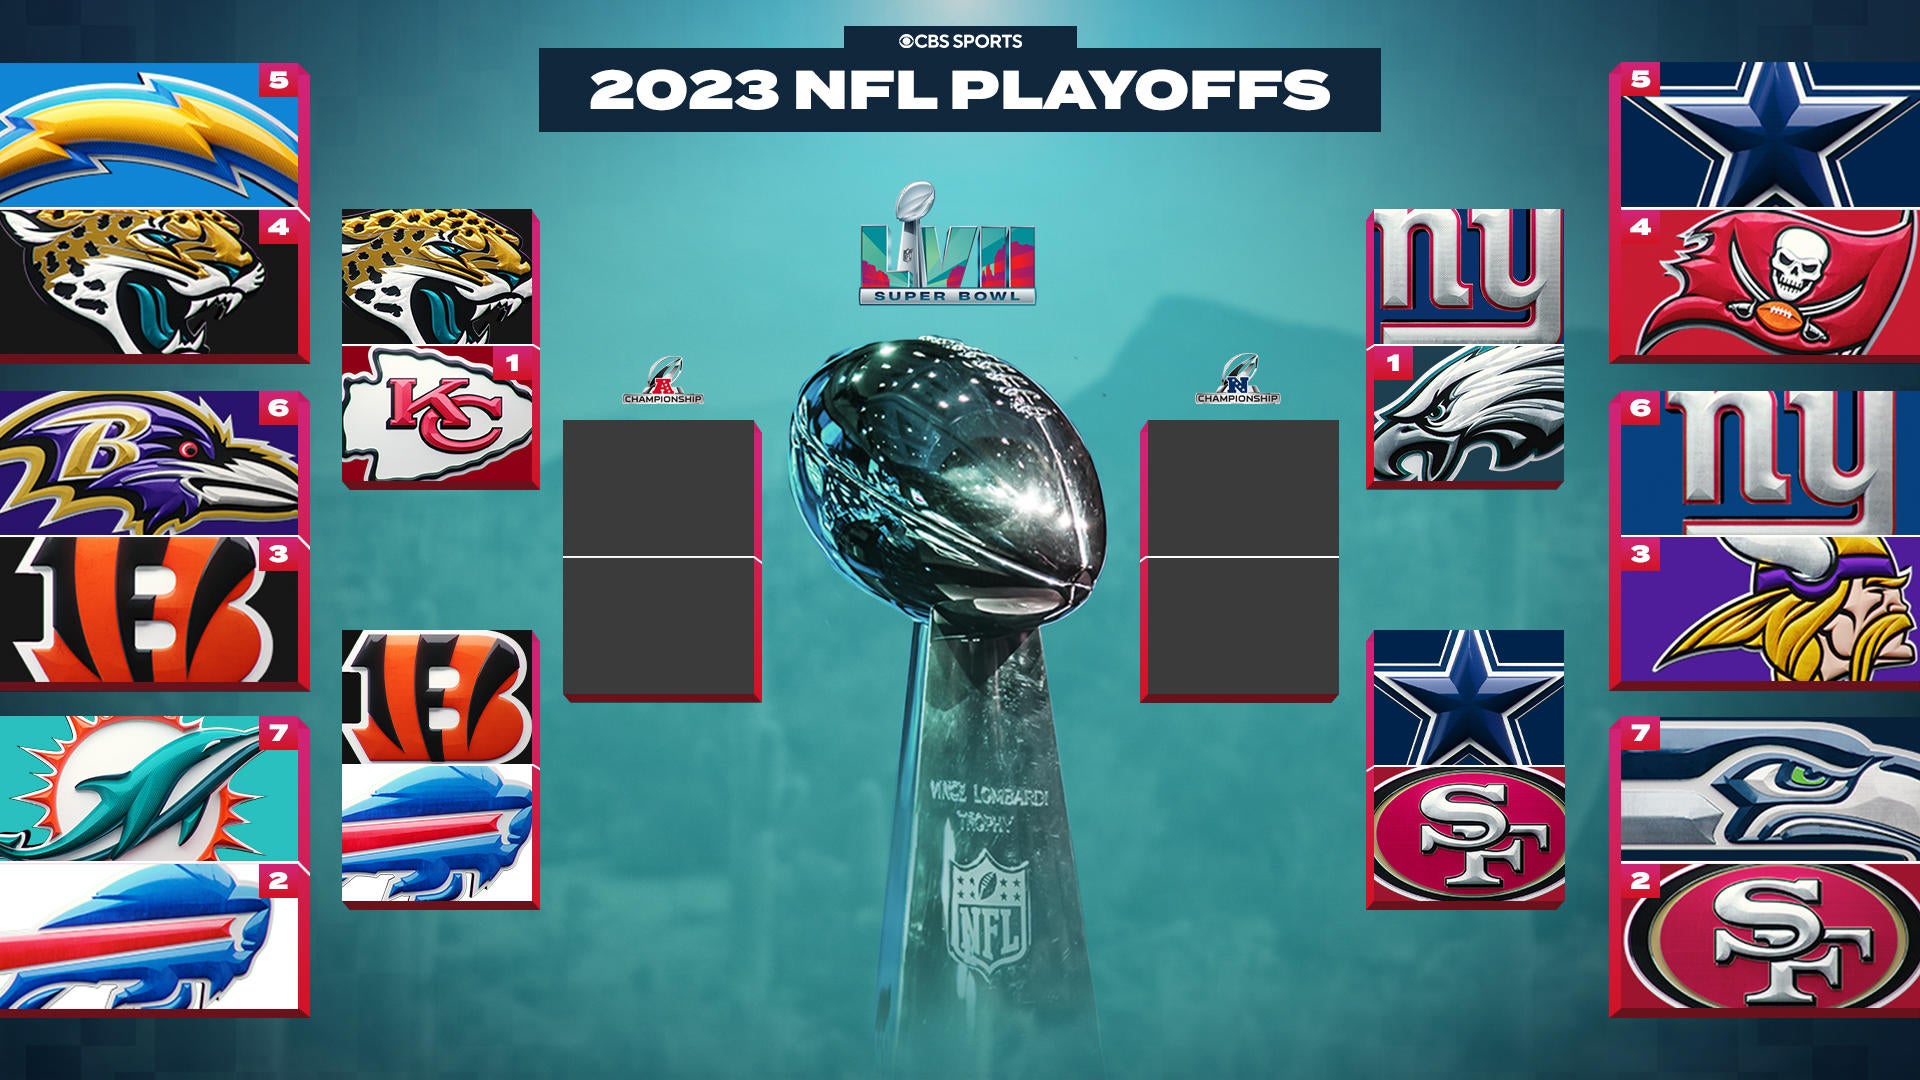 2023 NFL playoff schedule, bracket: Dates, times, TV, streaming for every round of AFC and NFC postseason